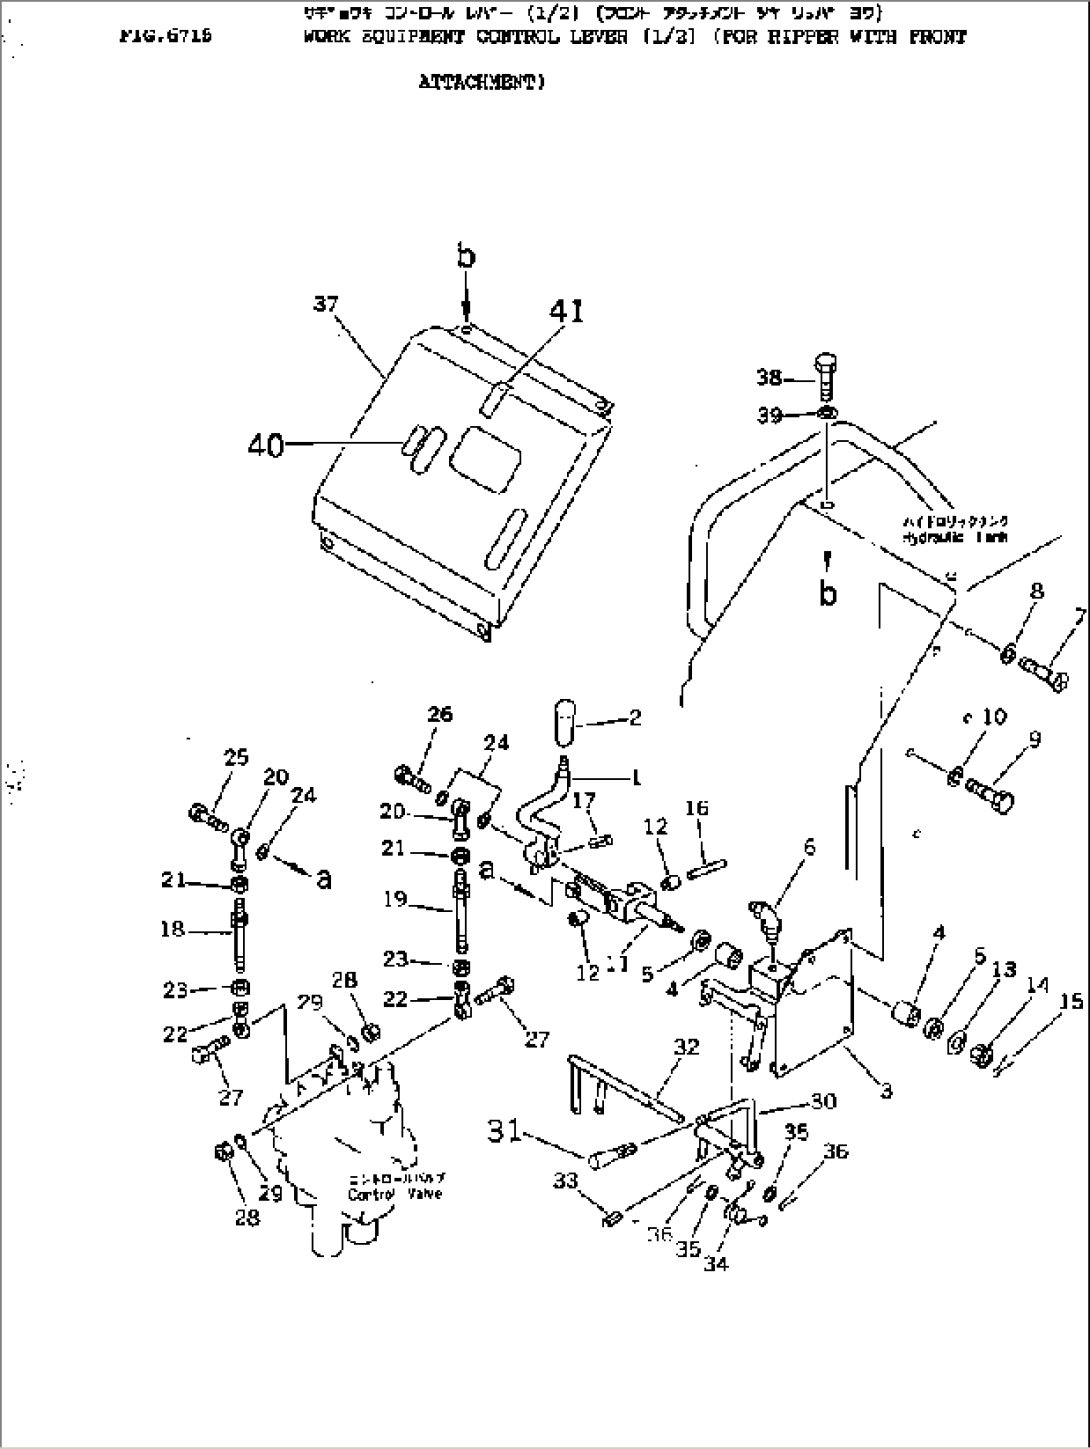 WORK EQUIPMENT CONTROL LEVER (1/2) (FOR RIPPER WITH FRONT ATTACHMENT)